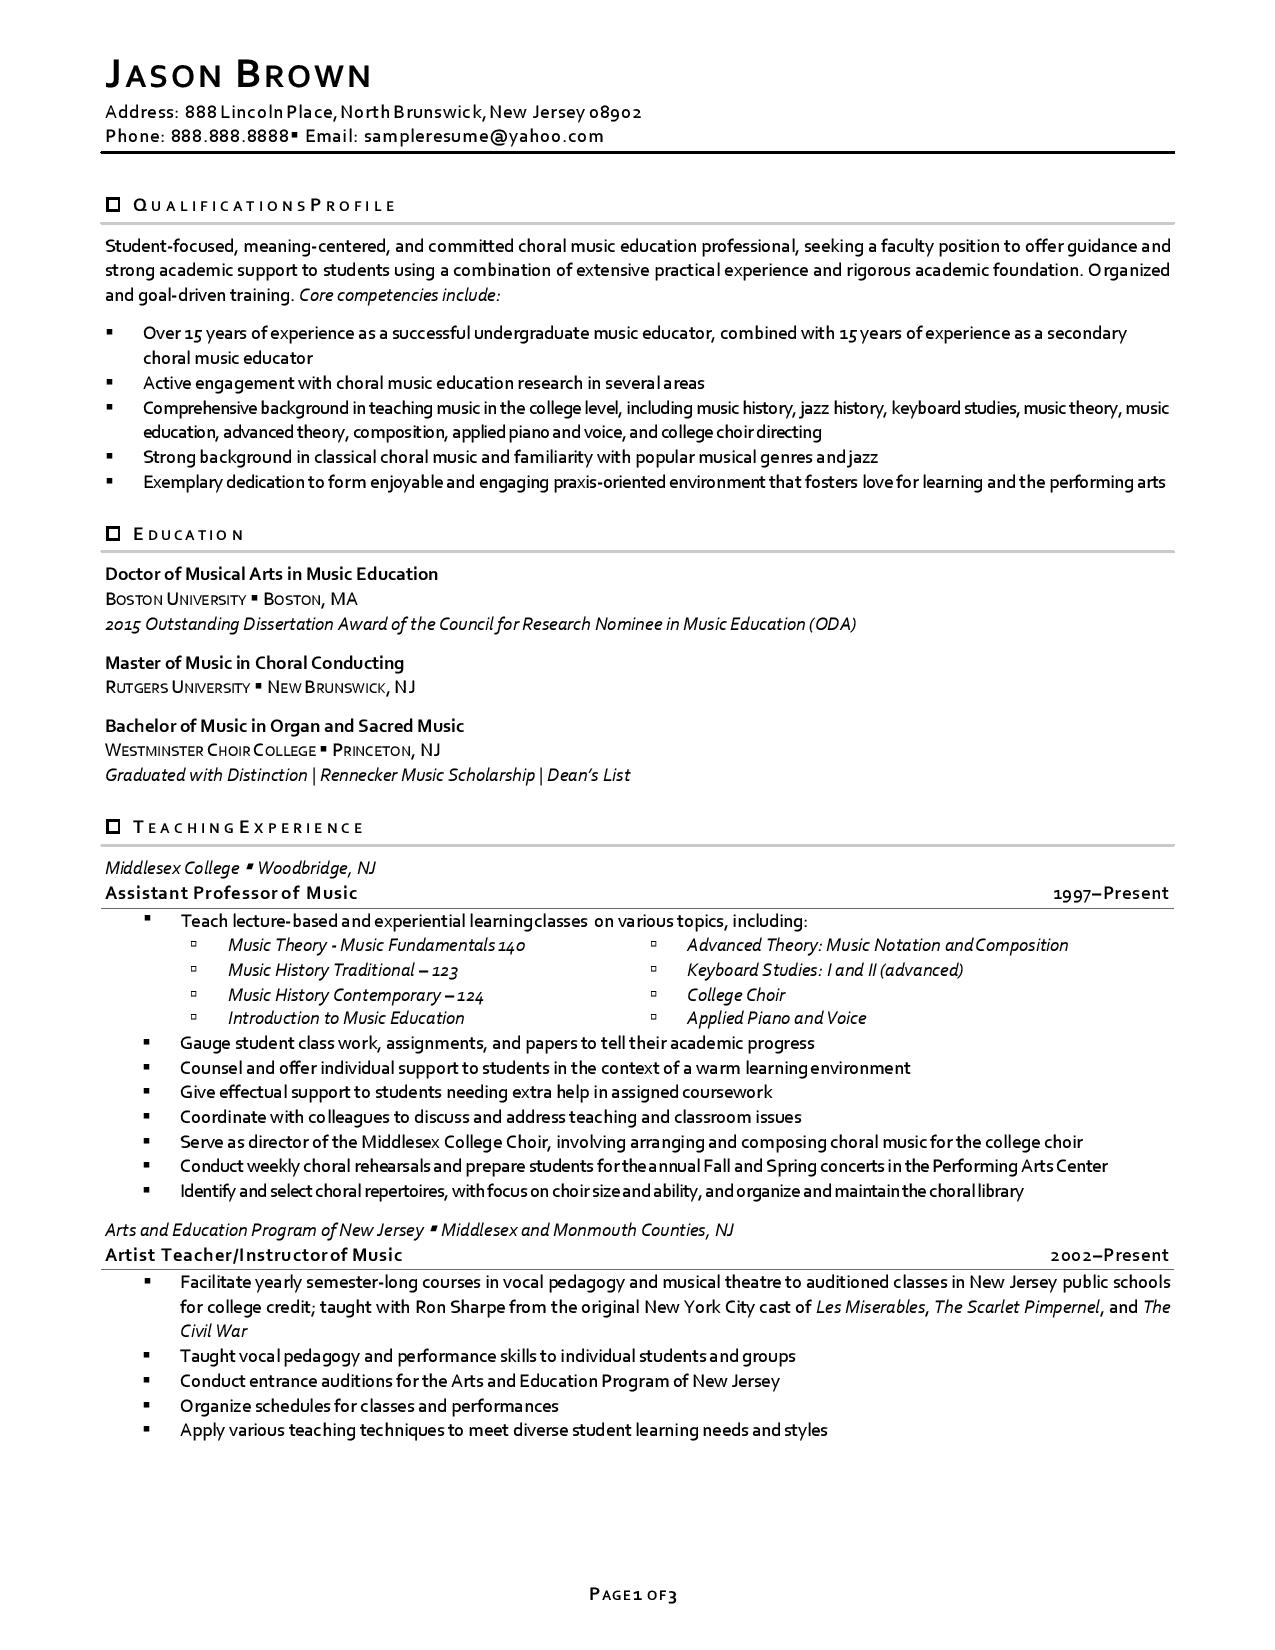 resume faculty position sample